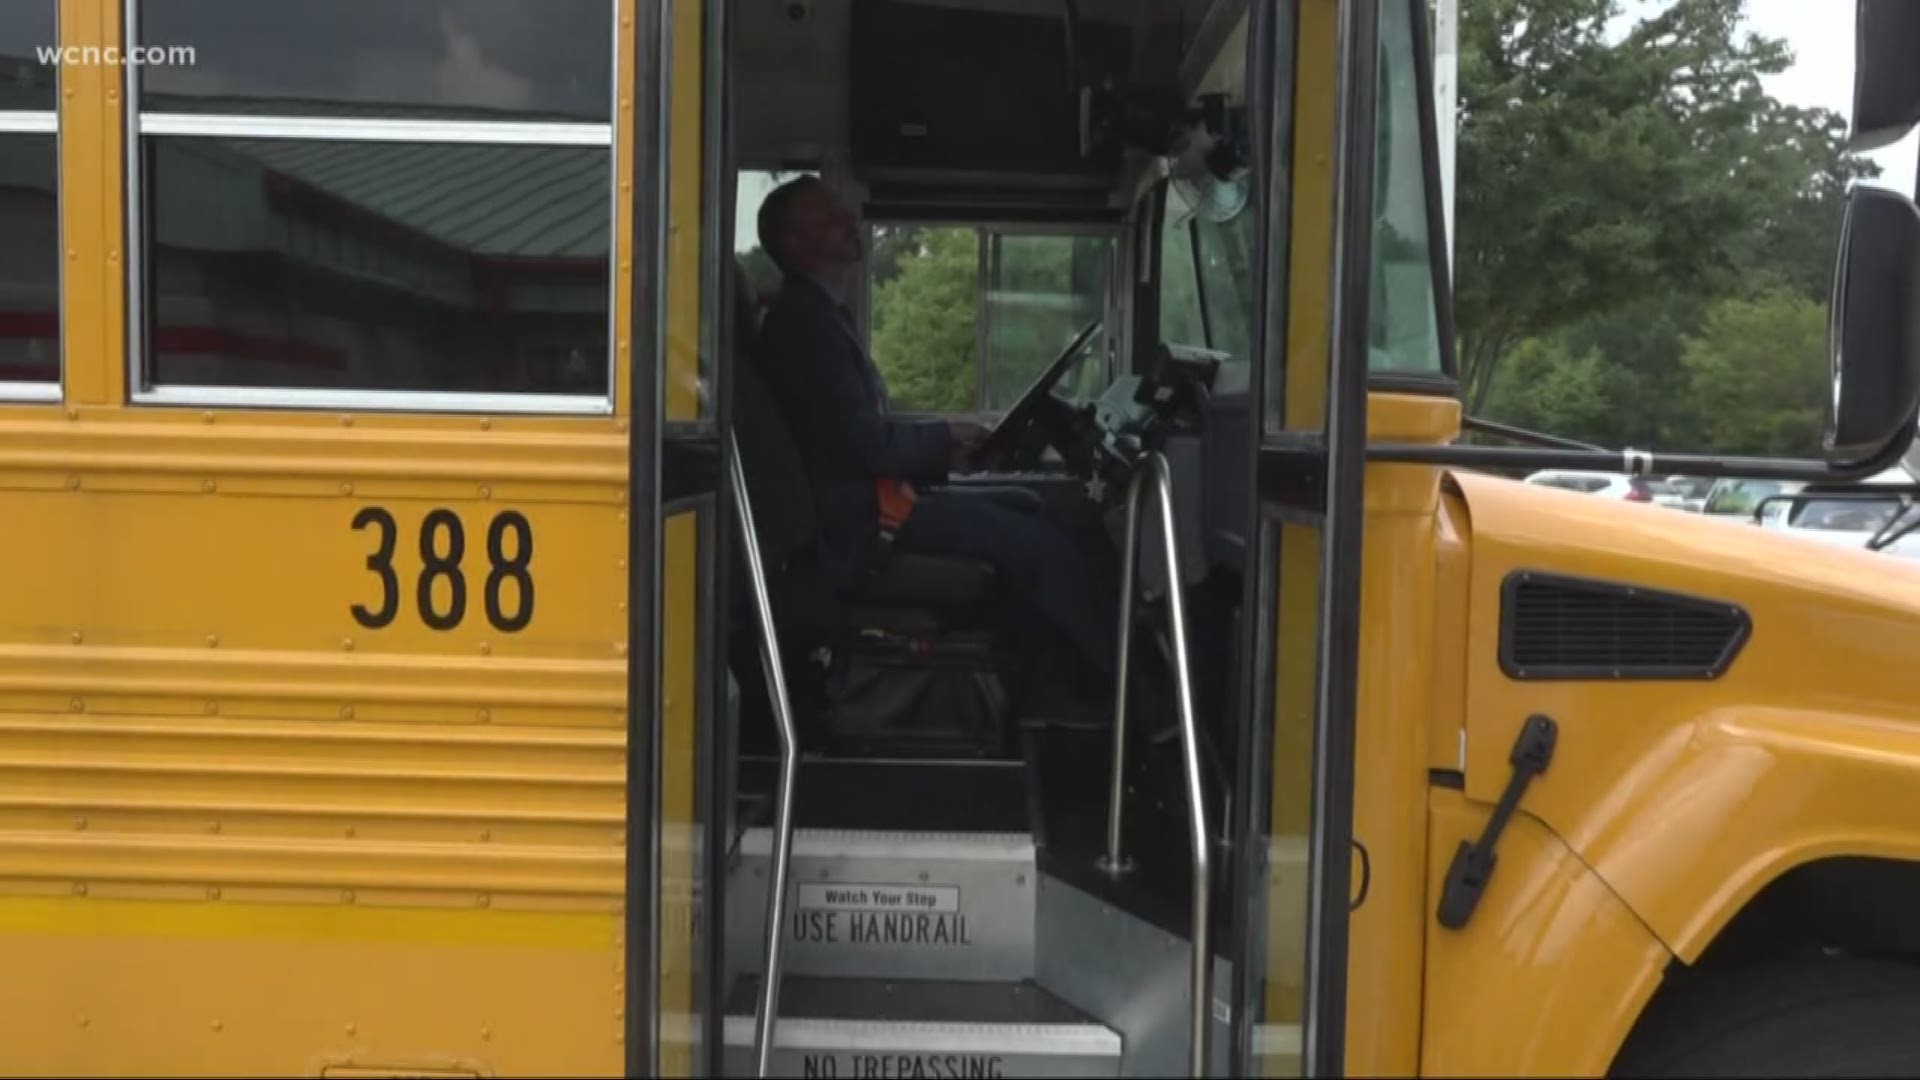 Charlotte-Mecklenburg Schools is launching a new app to help students and parents keep track of the busy school bus schedule.